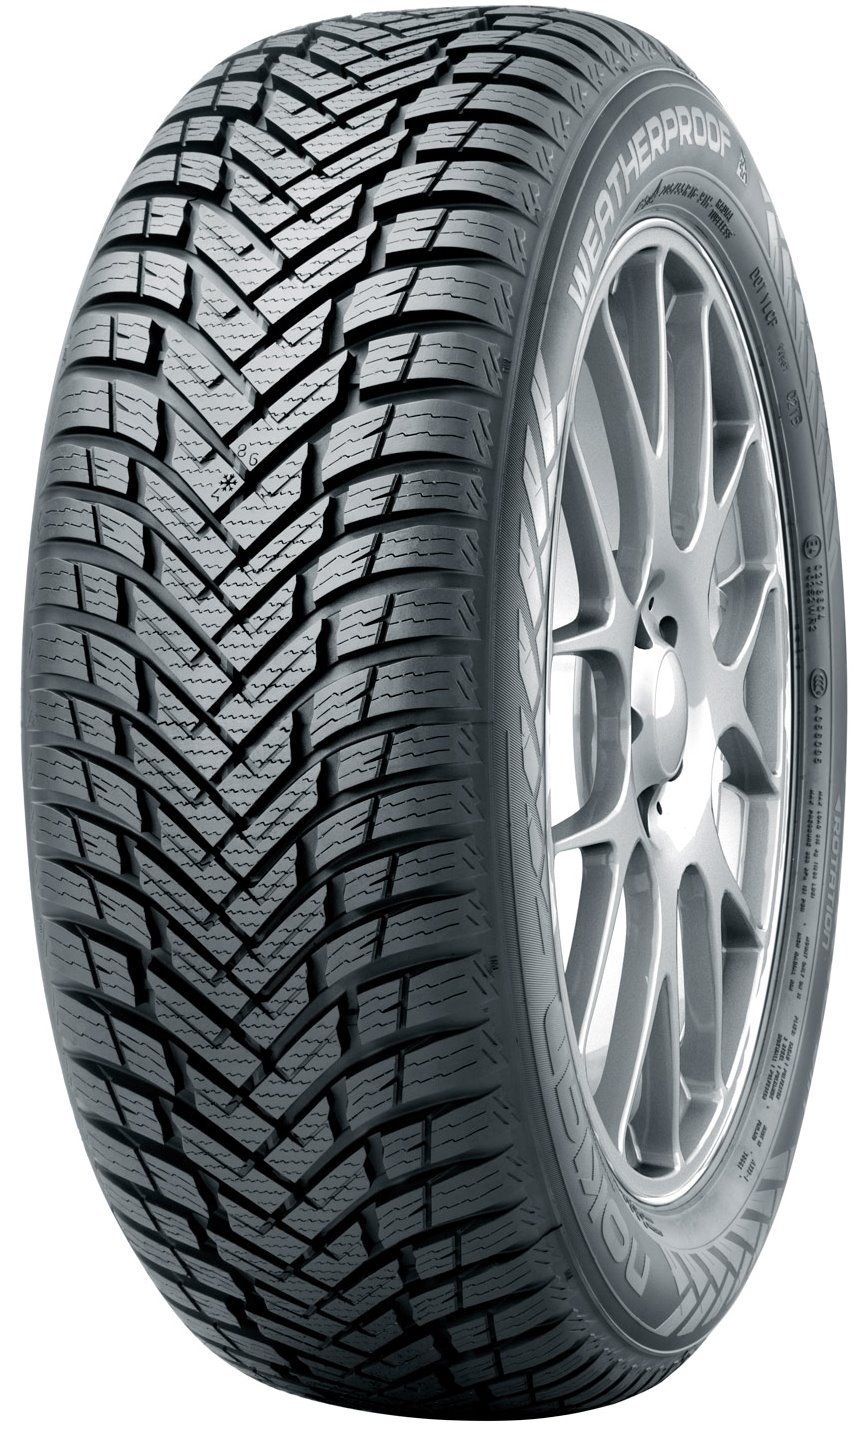 Nokian WeatherProof - Tyre Reviews and Tests